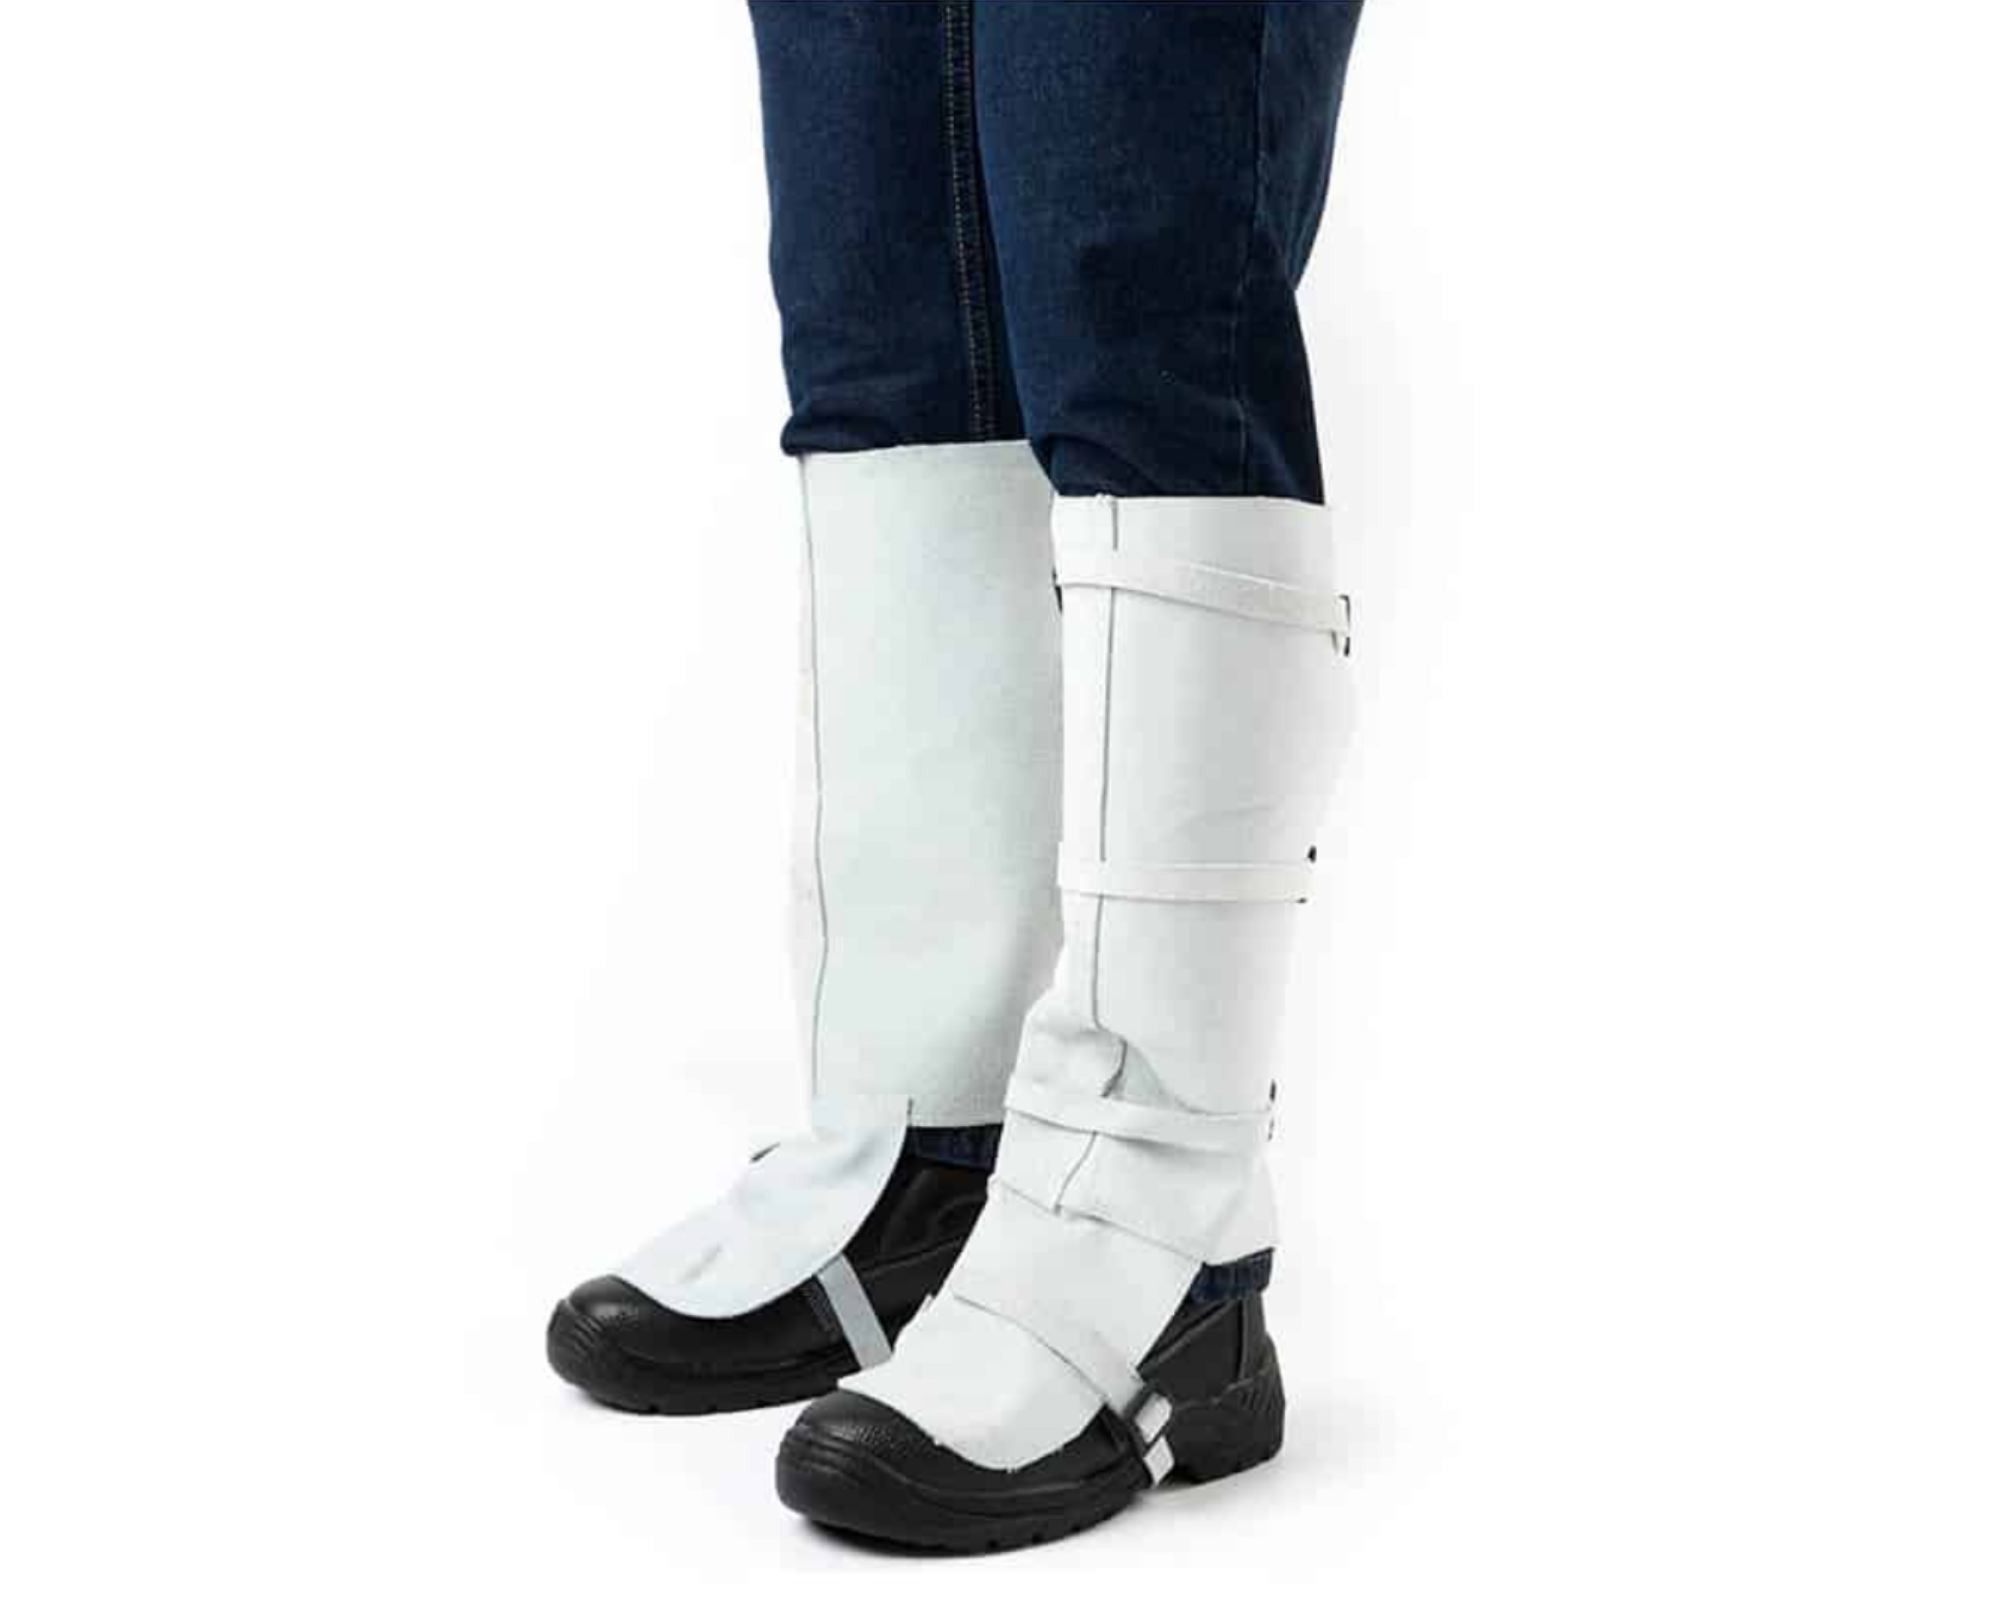 Dromex DH Quality Leather Knee Length Spat (DH SPAT KNEE) - White